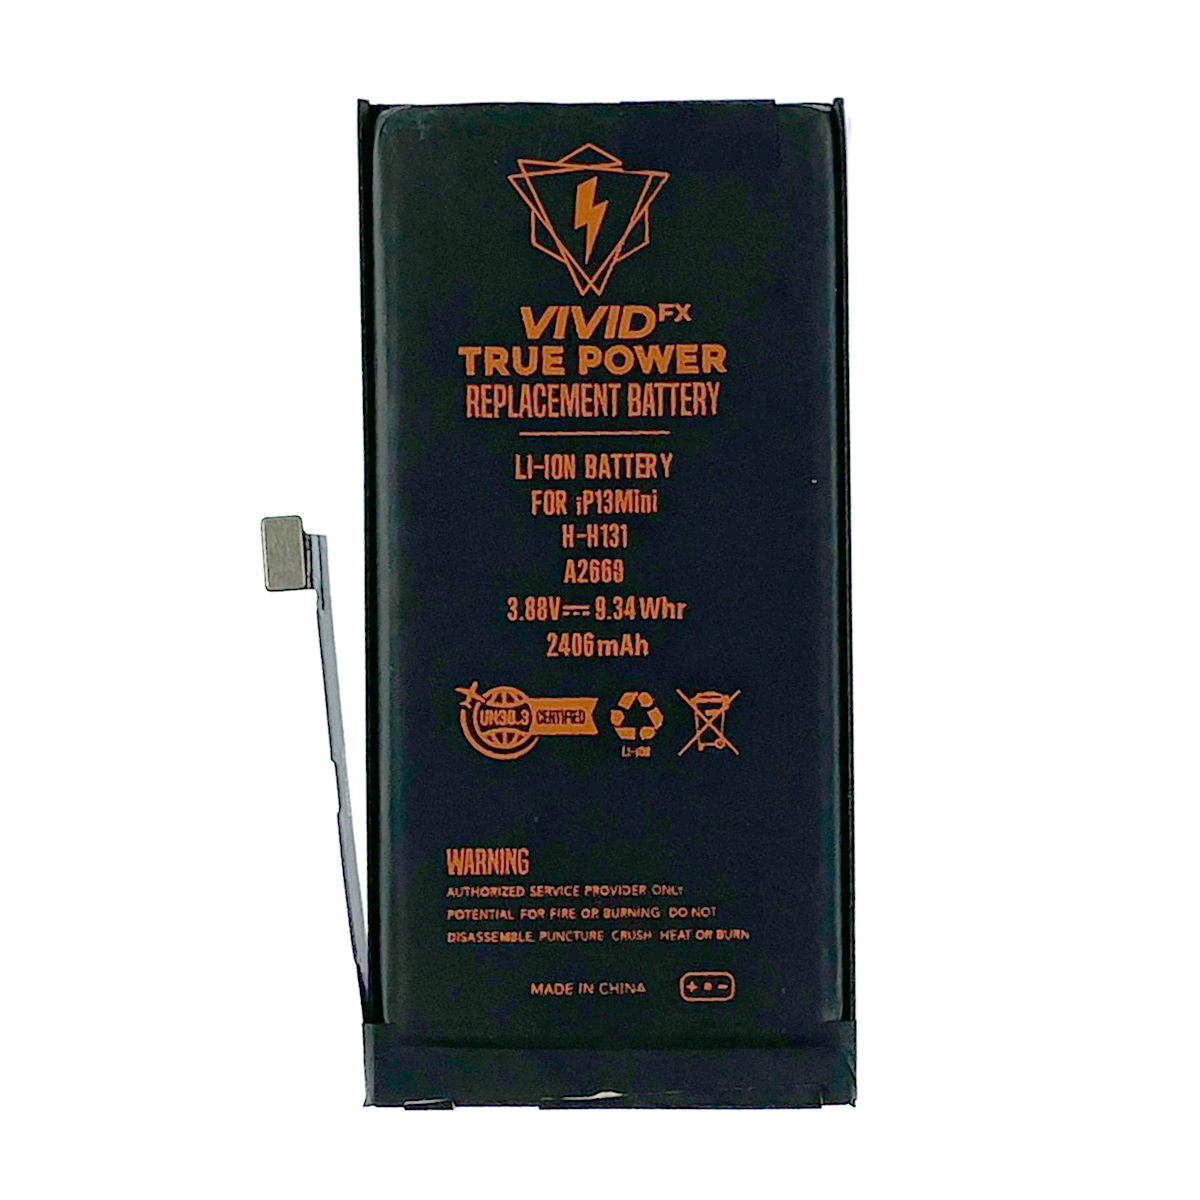 iPhone 13 Mini Battery Replacement